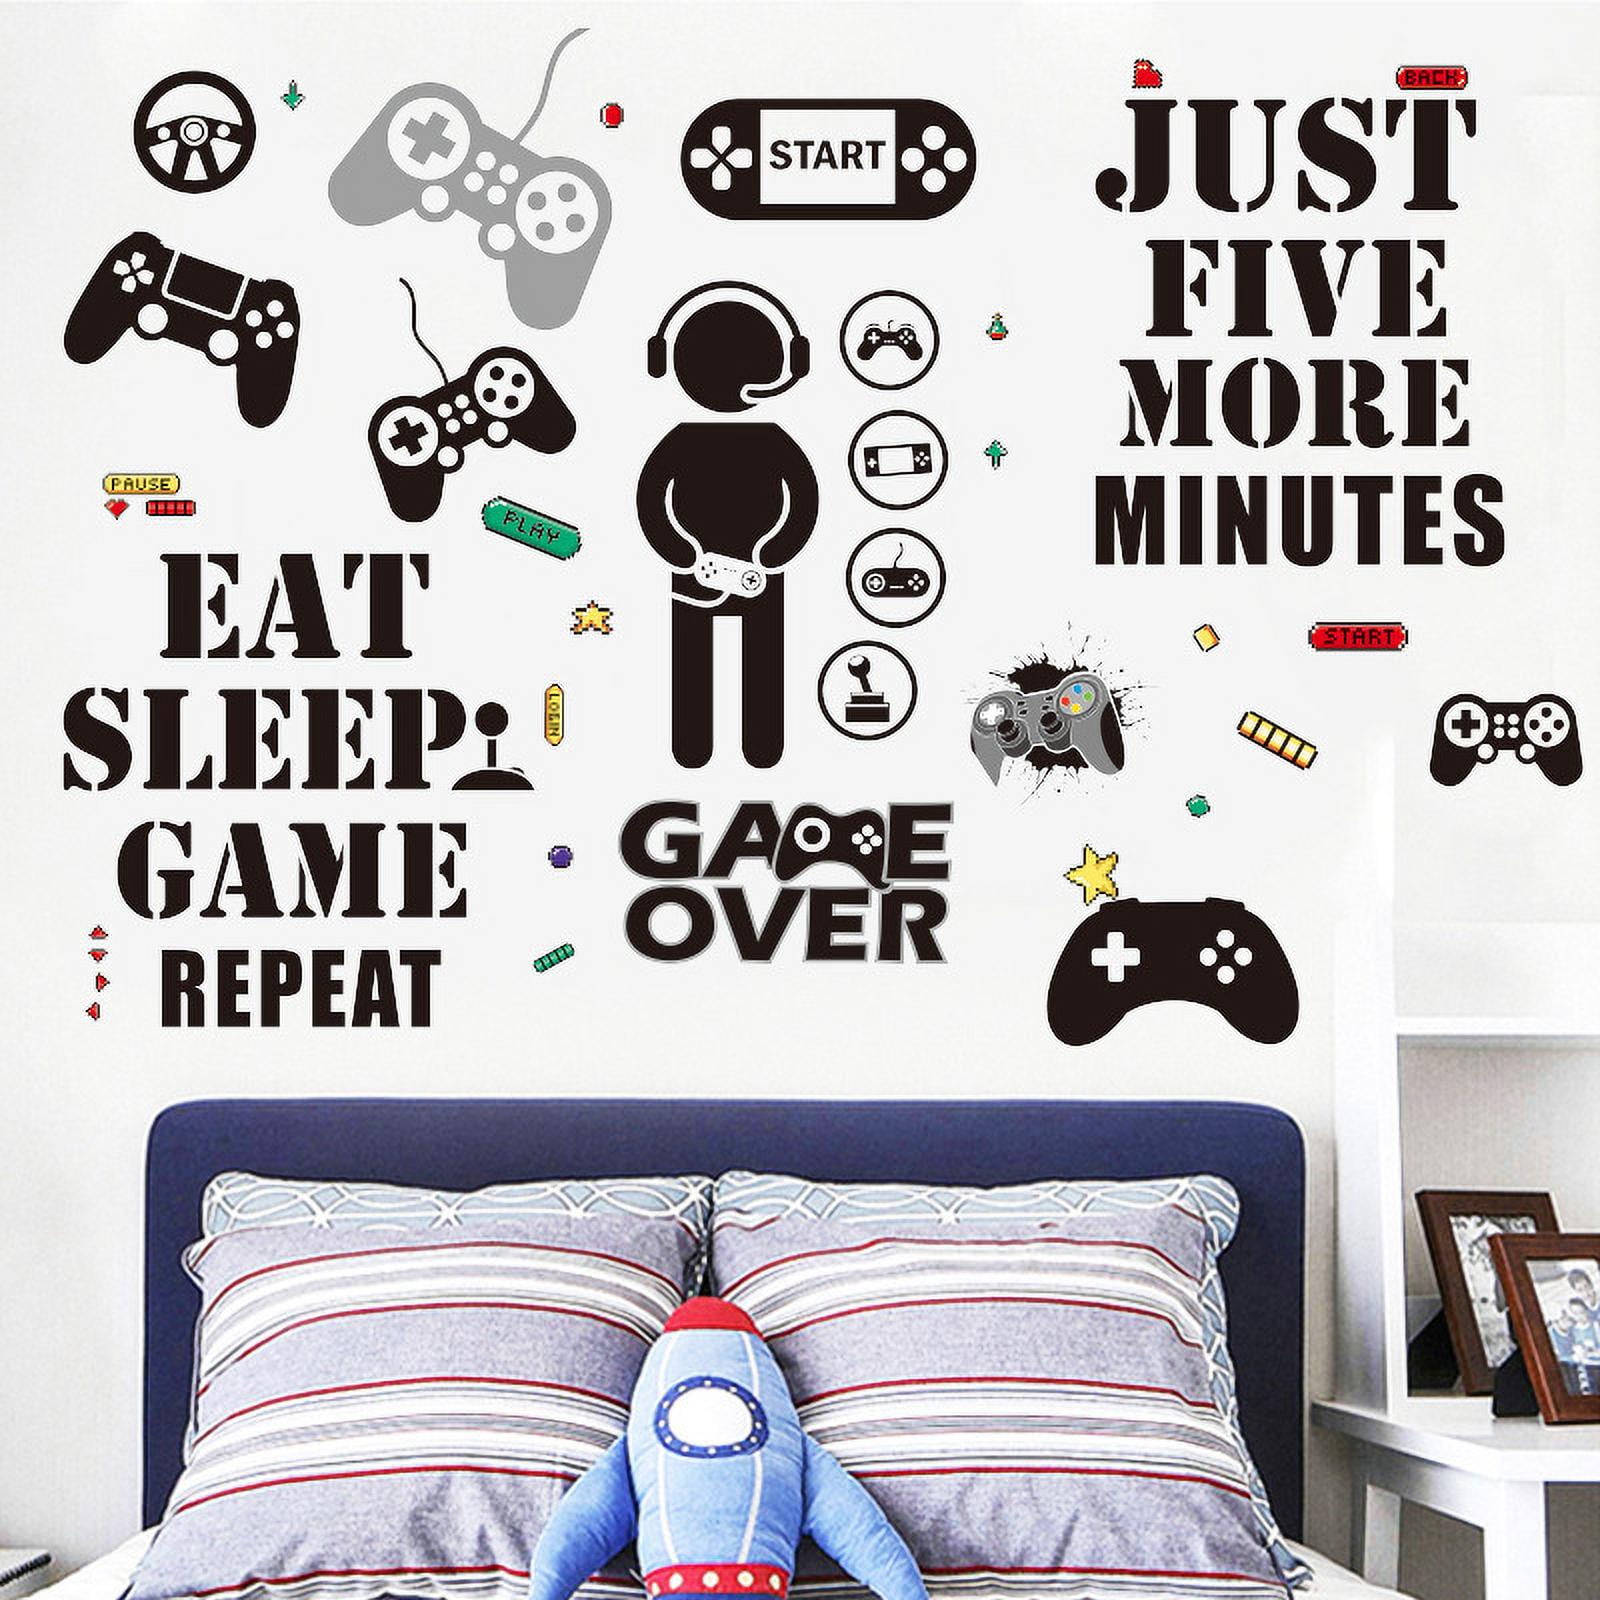 Gamer Wall Decals, Video Game Wall Stickers, Handle Controller Removable  Art Design Wall Decor, Vinyl DIY Joystick Murals for Boys Room Home  Playroom